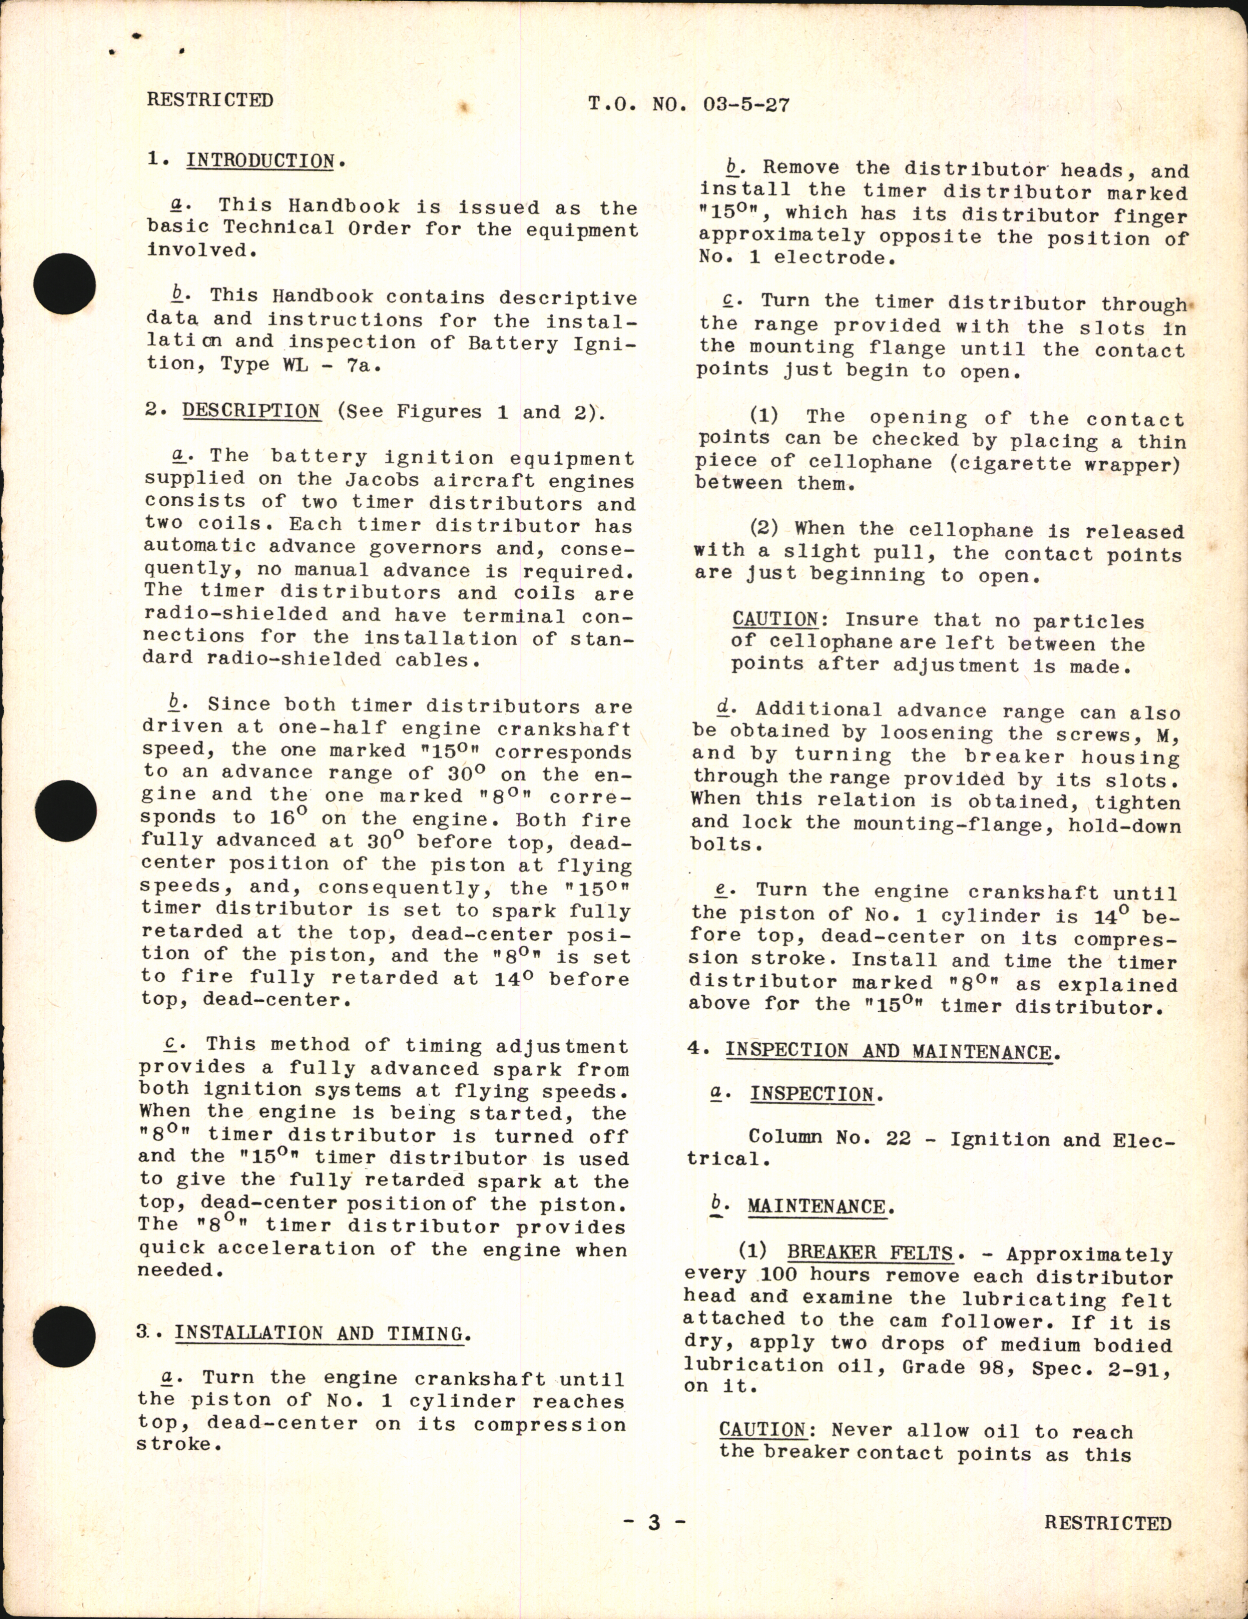 Sample page 5 from AirCorps Library document: Handbook of Service and Operation Instructions with Parts List for Battery Ignition Type WL-7A (For Jacobs Engines)